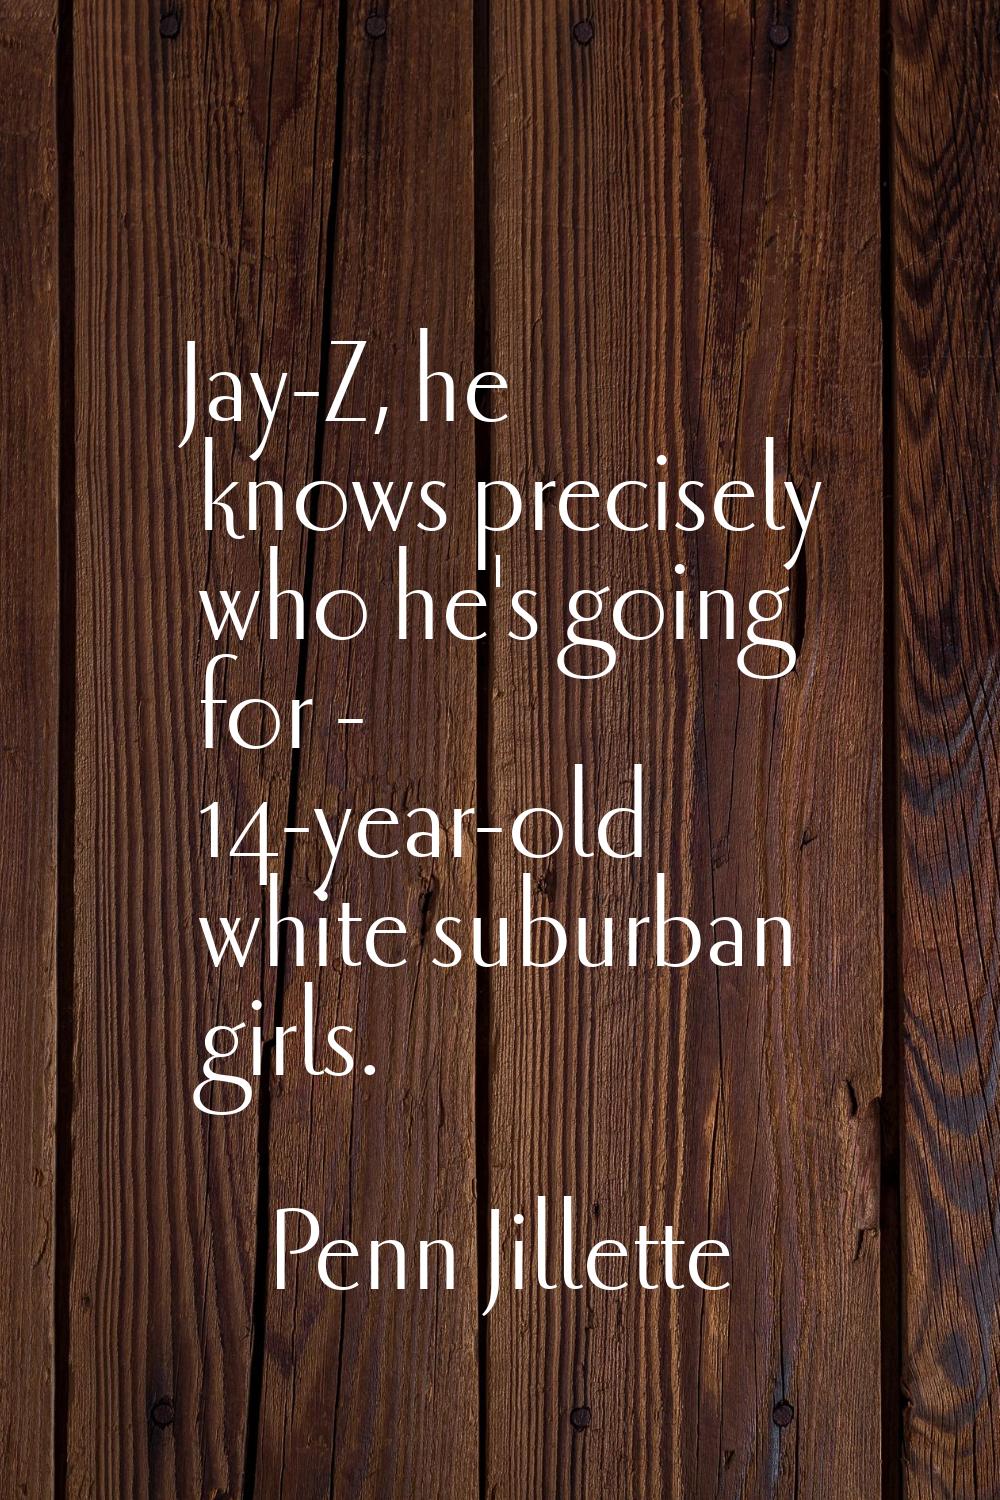 Jay-Z, he knows precisely who he's going for - 14-year-old white suburban girls.